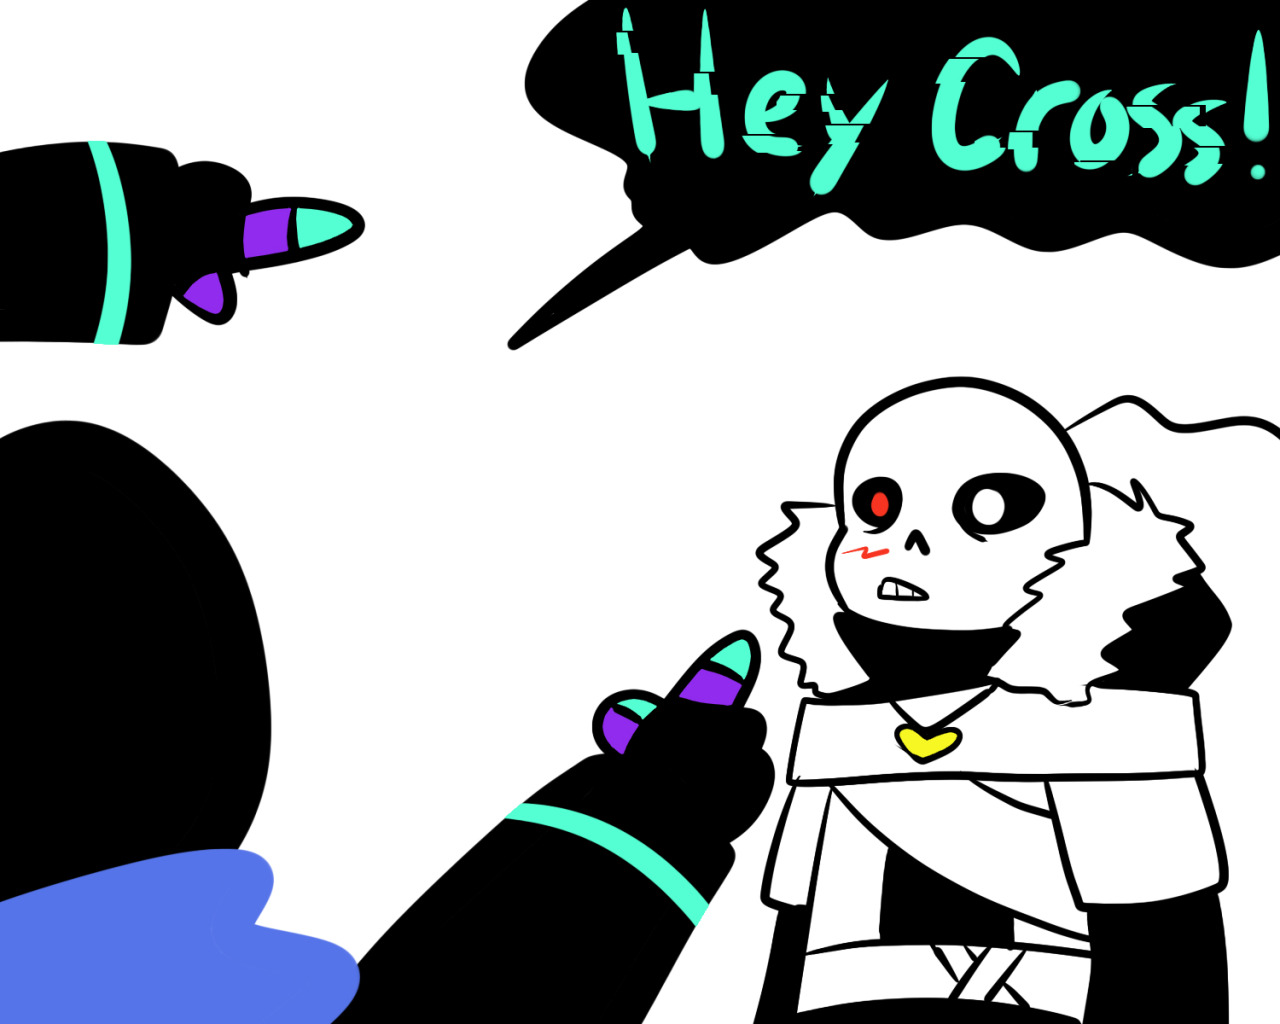 ArtwiL on X: The meeting of the Cross and Ink!! Anyway, I'm going to draw  something cute again soon, hah х3 #undertale #tobyfox #sans #cross # crosssans #Underverse #undertaleAU #crink #fanart #ink #inksans #